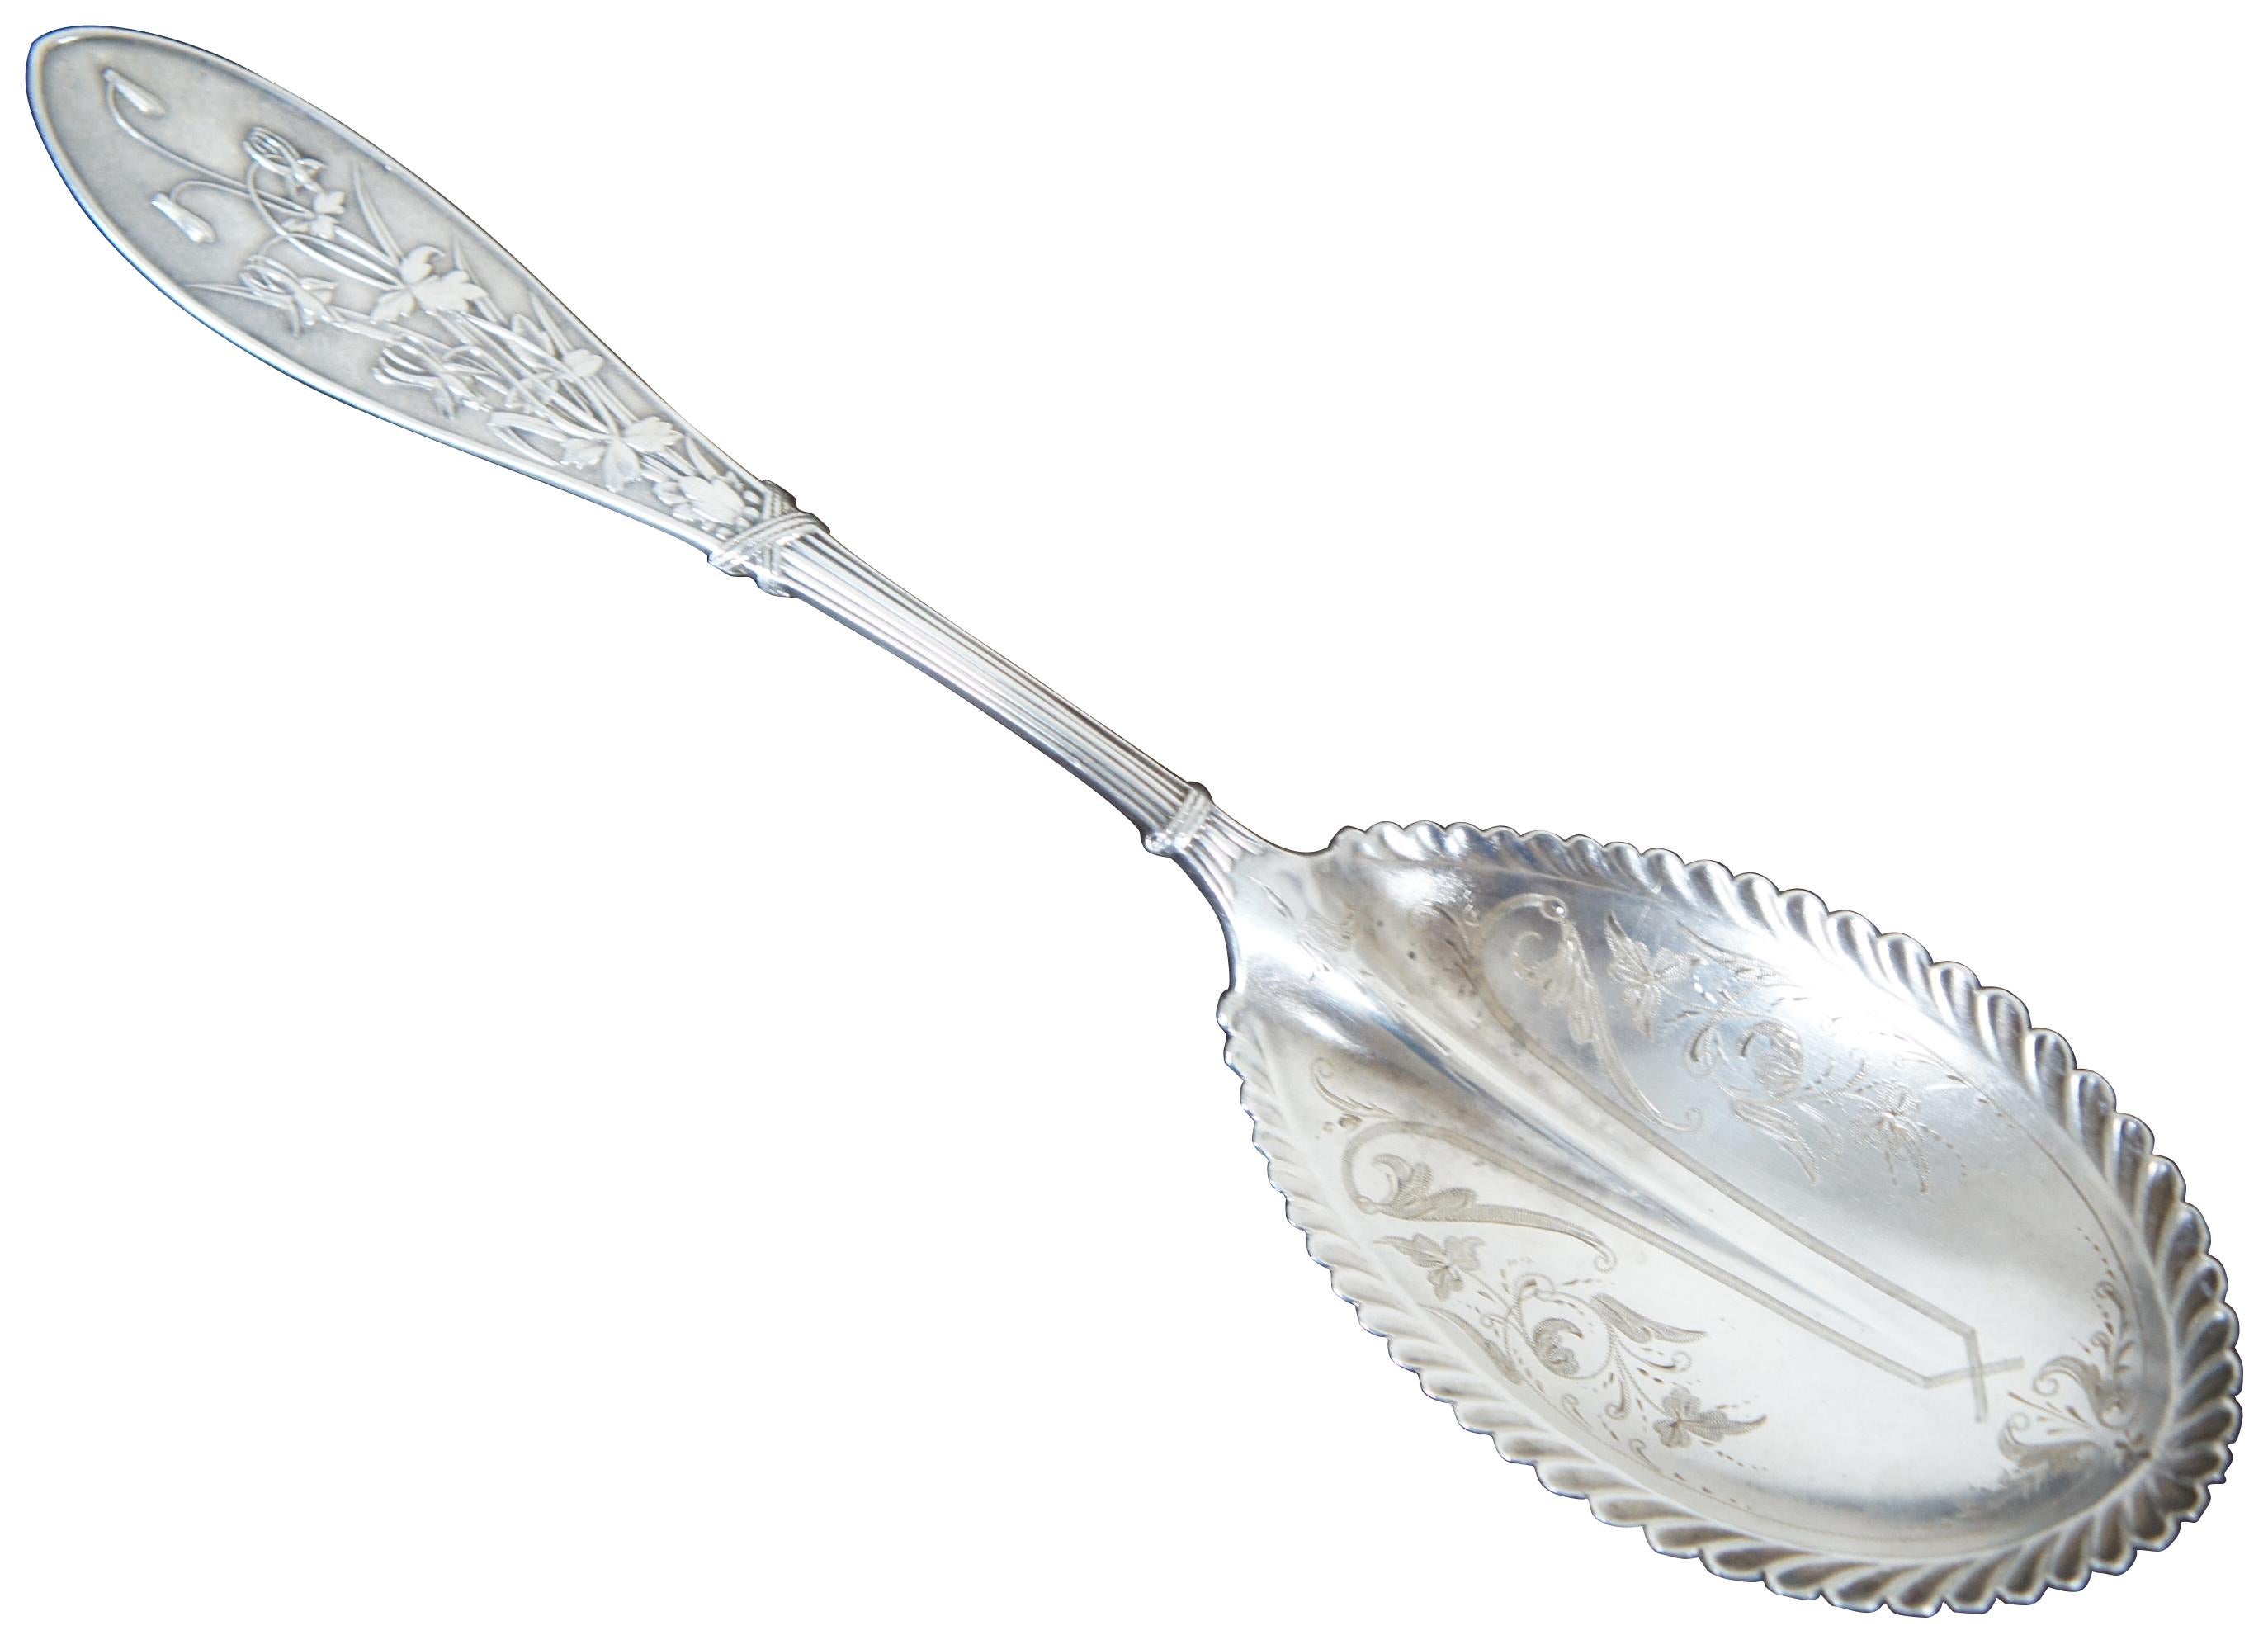 Antique W.W. Child Whiting Manufacturing Company sterling silver .925 casserole berry or citrus spoon in the 1870 Honeysuckle pattern with floral etched and scallop edged bowl; monogrammed “AAB.” Similar to the Arabeqsque pattern.
    